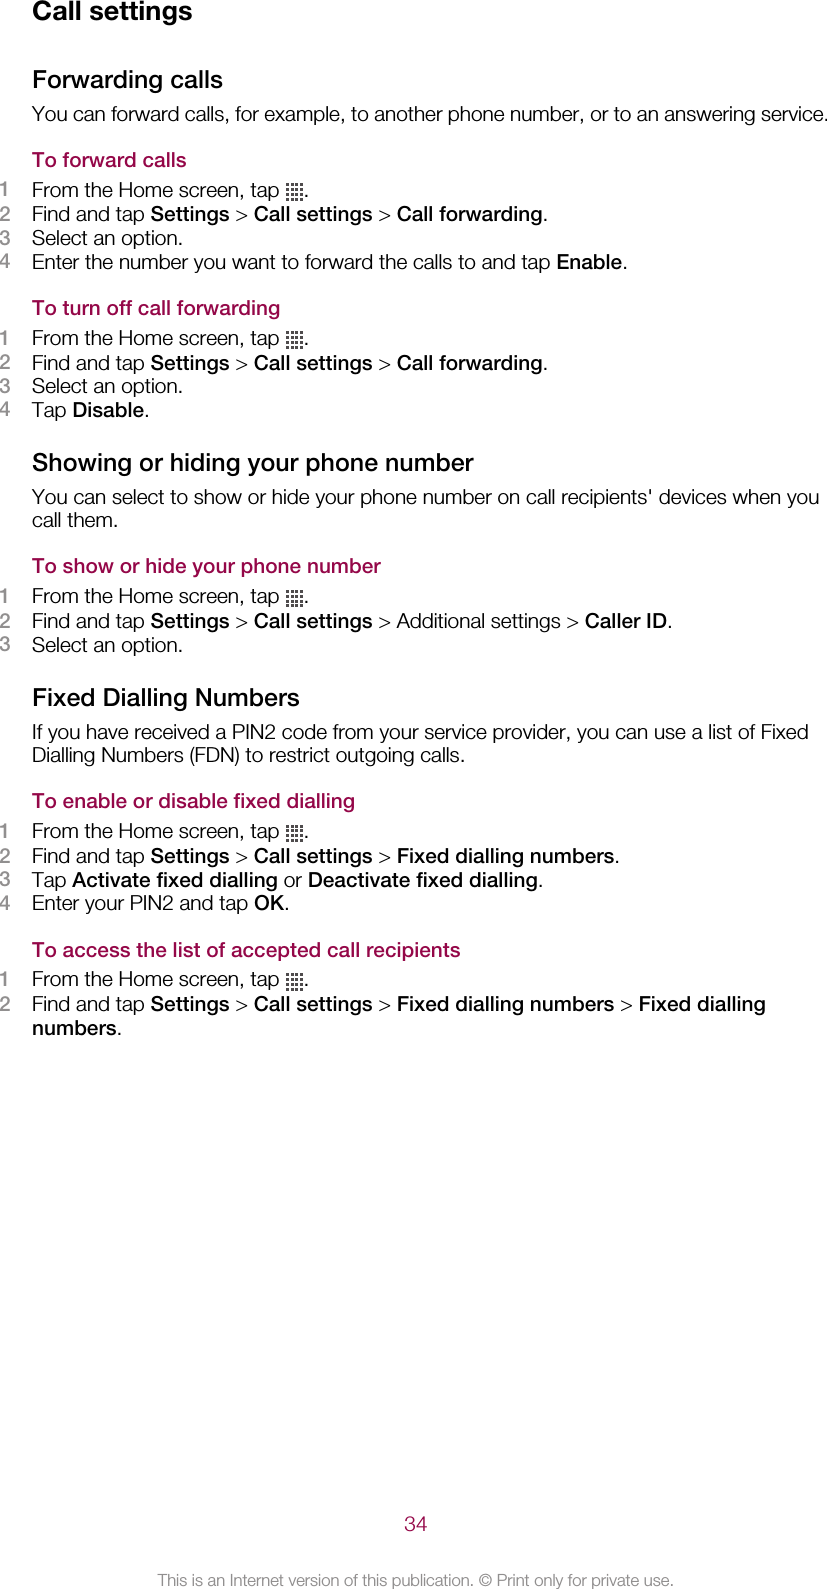 Call settingsForwarding callsYou can forward calls, for example, to another phone number, or to an answering service.To forward calls1From the Home screen, tap  .2Find and tap Settings &gt; Call settings &gt; Call forwarding.3Select an option.4Enter the number you want to forward the calls to and tap Enable.To turn off call forwarding1From the Home screen, tap  .2Find and tap Settings &gt; Call settings &gt; Call forwarding.3Select an option.4Tap Disable.Showing or hiding your phone numberYou can select to show or hide your phone number on call recipients&apos; devices when youcall them.To show or hide your phone number1From the Home screen, tap  .2Find and tap Settings &gt; Call settings &gt; Additional settings &gt; Caller ID.3Select an option.Fixed Dialling NumbersIf you have received a PIN2 code from your service provider, you can use a list of FixedDialling Numbers (FDN) to restrict outgoing calls.To enable or disable fixed dialling1From the Home screen, tap  .2Find and tap Settings &gt; Call settings &gt; Fixed dialling numbers.3Tap Activate fixed dialling or Deactivate fixed dialling.4Enter your PIN2 and tap OK.To access the list of accepted call recipients1From the Home screen, tap  .2Find and tap Settings &gt; Call settings &gt; Fixed dialling numbers &gt; Fixed diallingnumbers.34This is an Internet version of this publication. © Print only for private use.